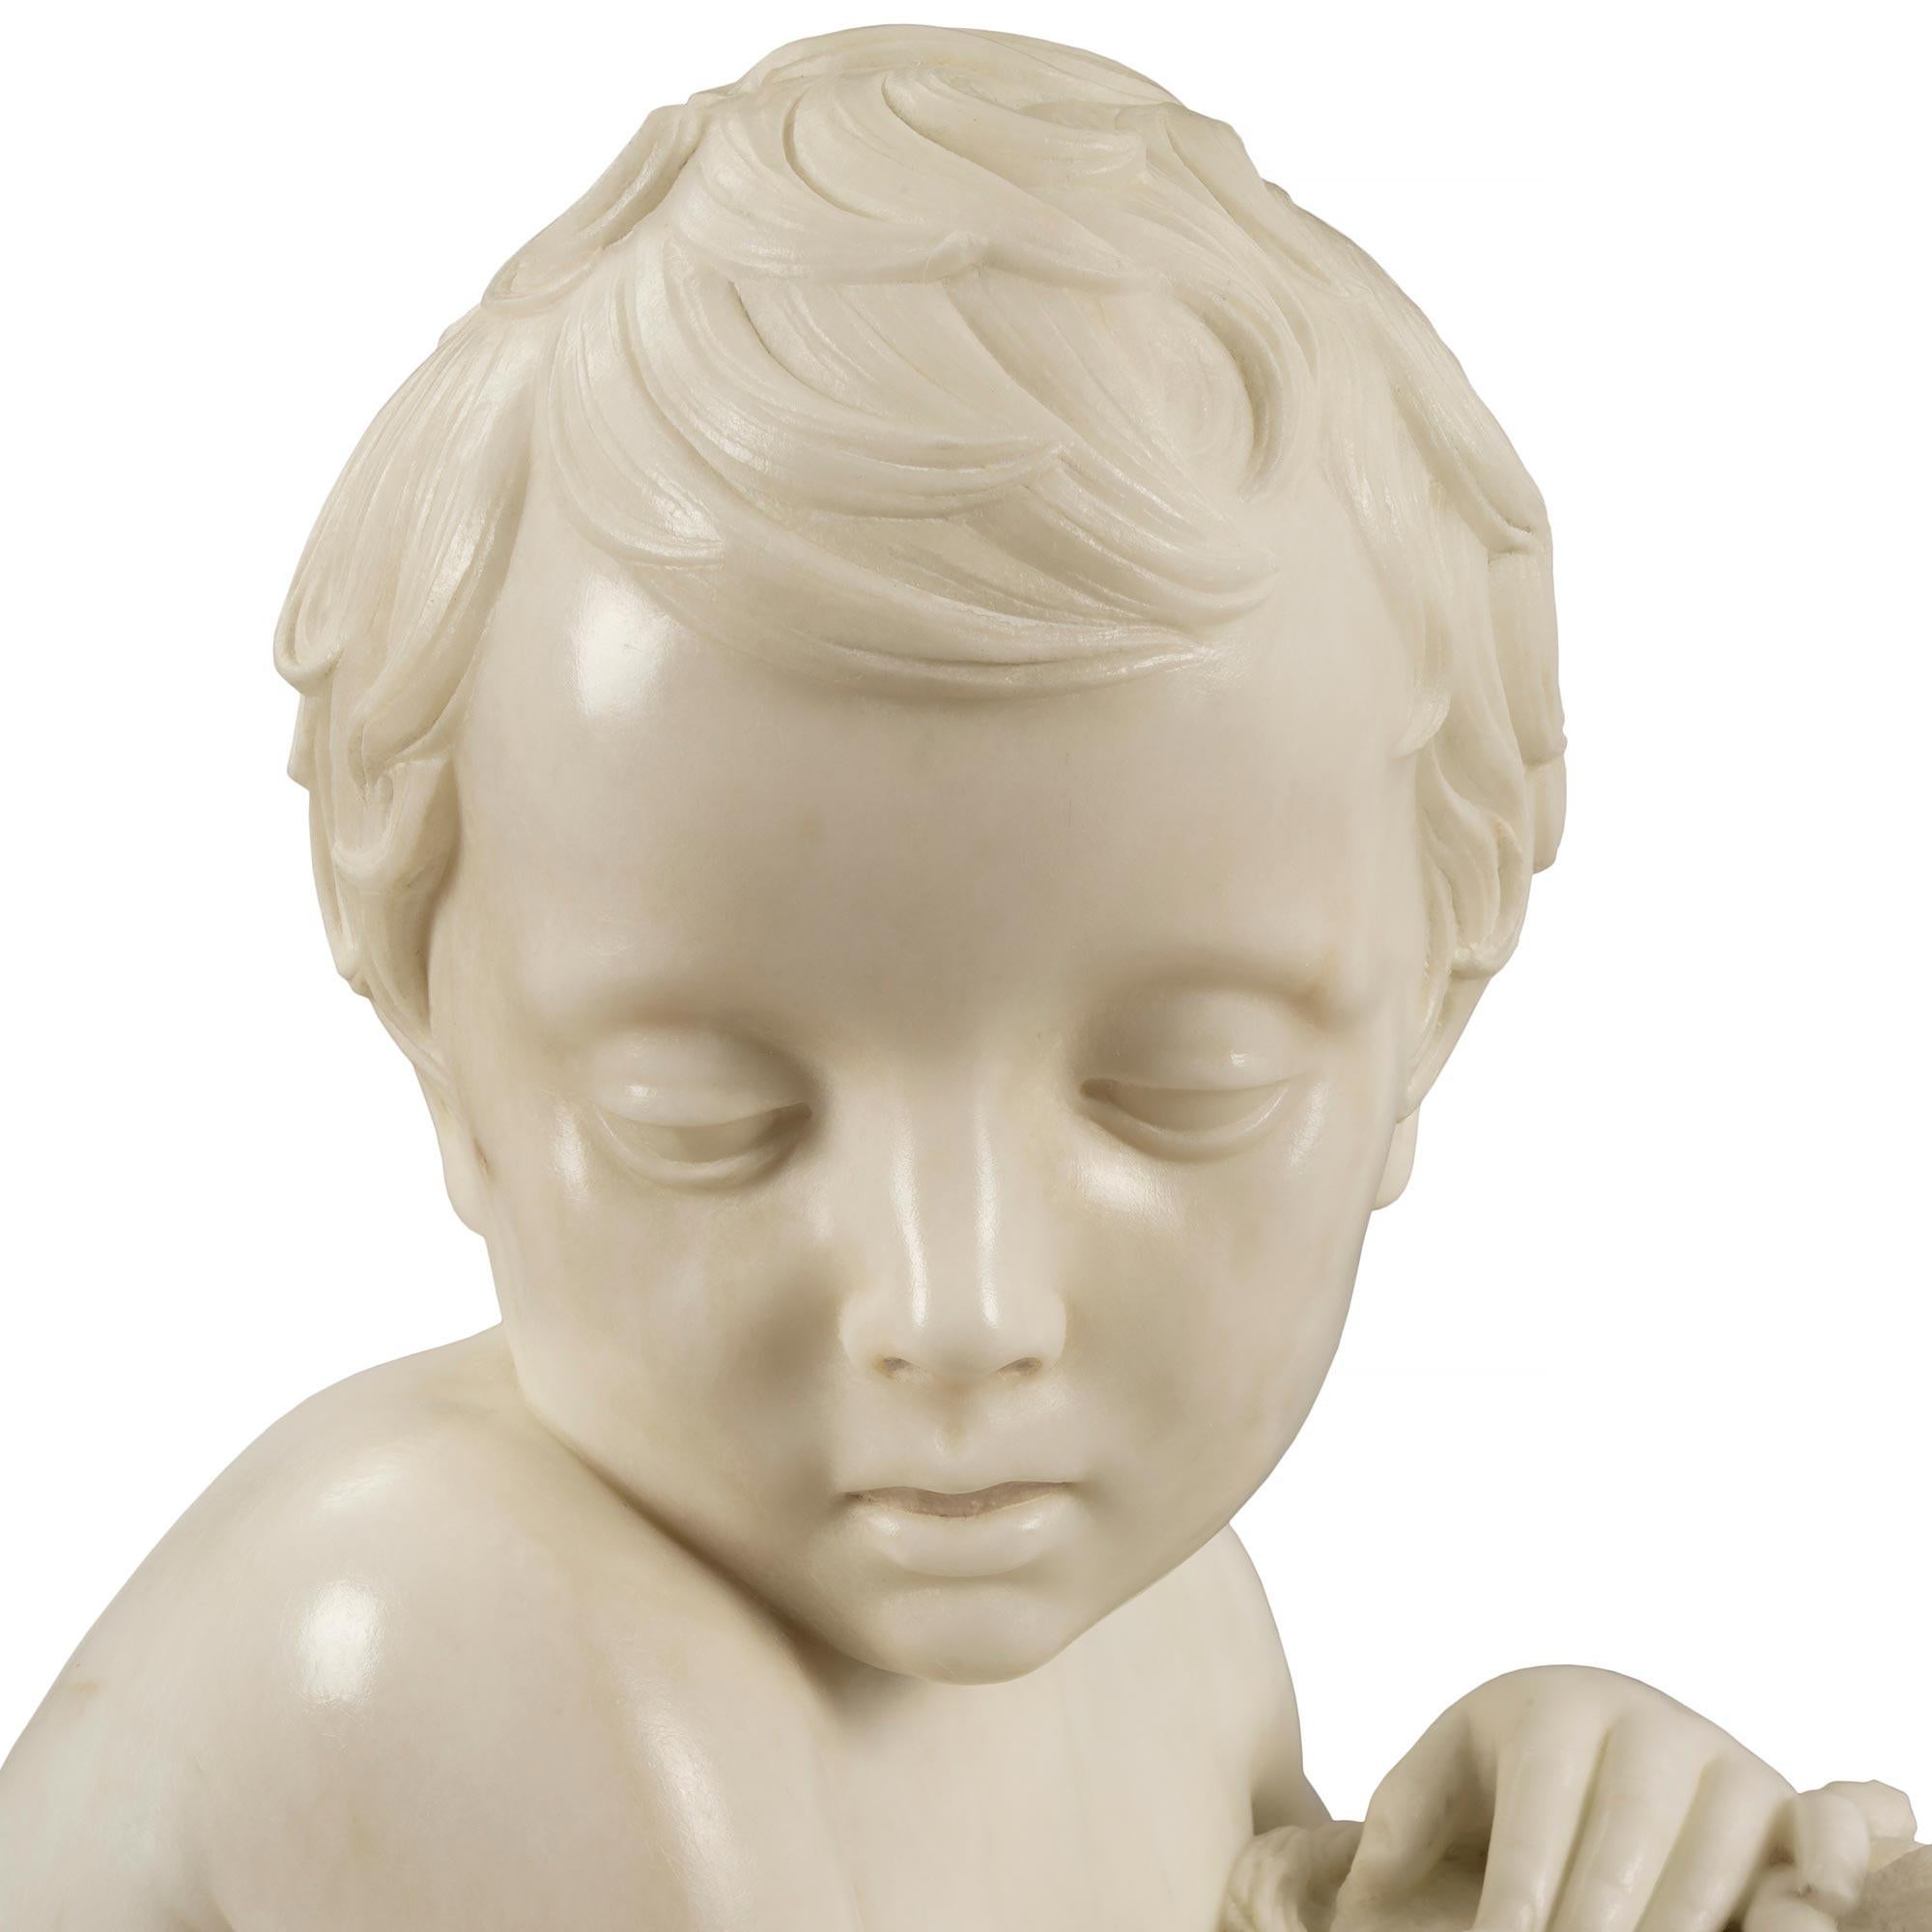 Italian 19th Century White Carrara Marble Signed Statue of a Young Boy For Sale 3